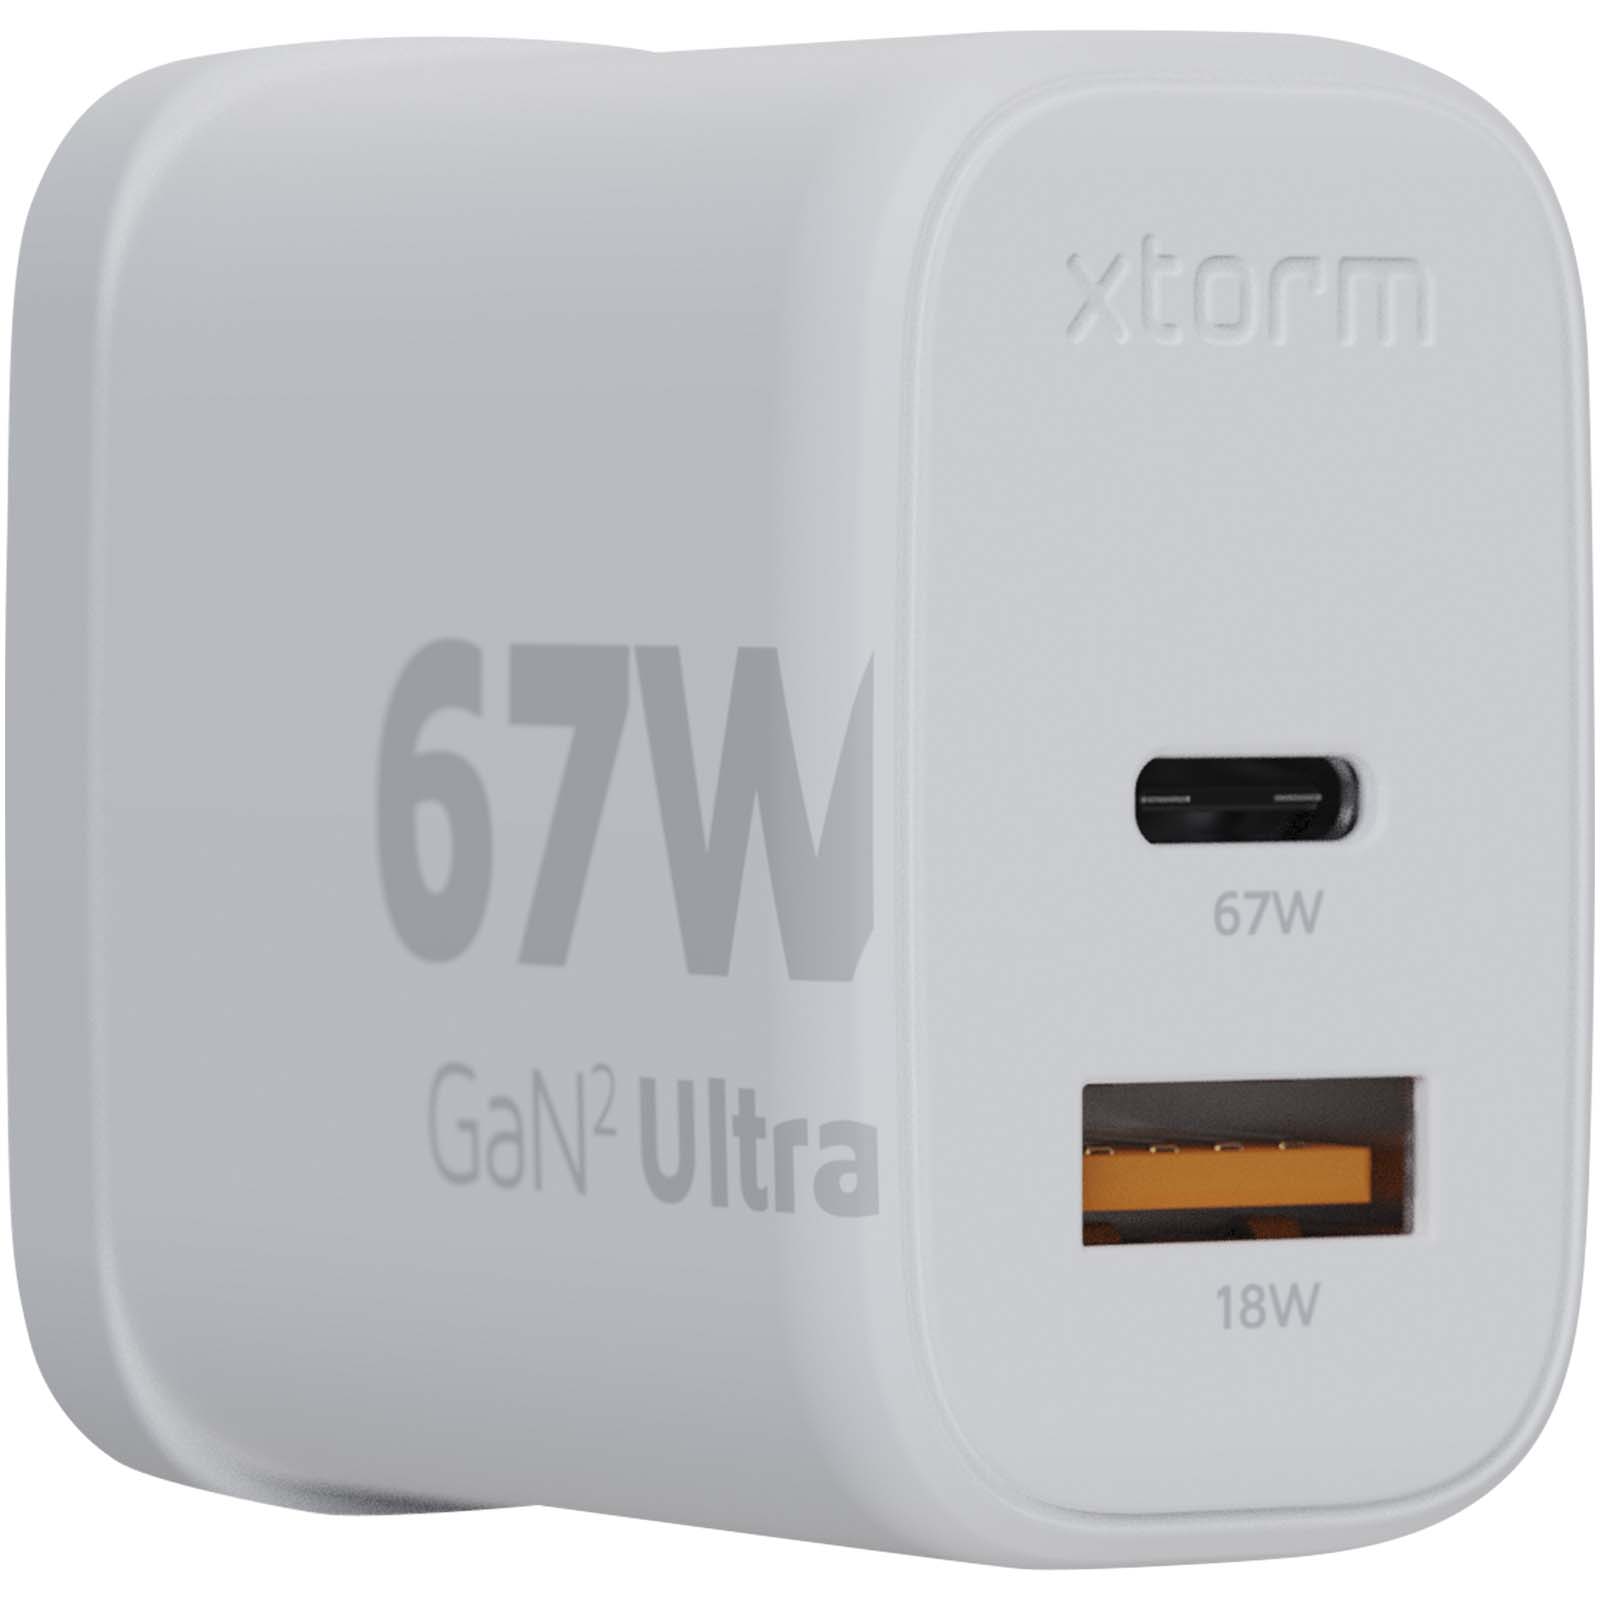 Advertising Chargers - Xtorm XEC067G GaN² Ultra 67W wall charger - UK plug - 4